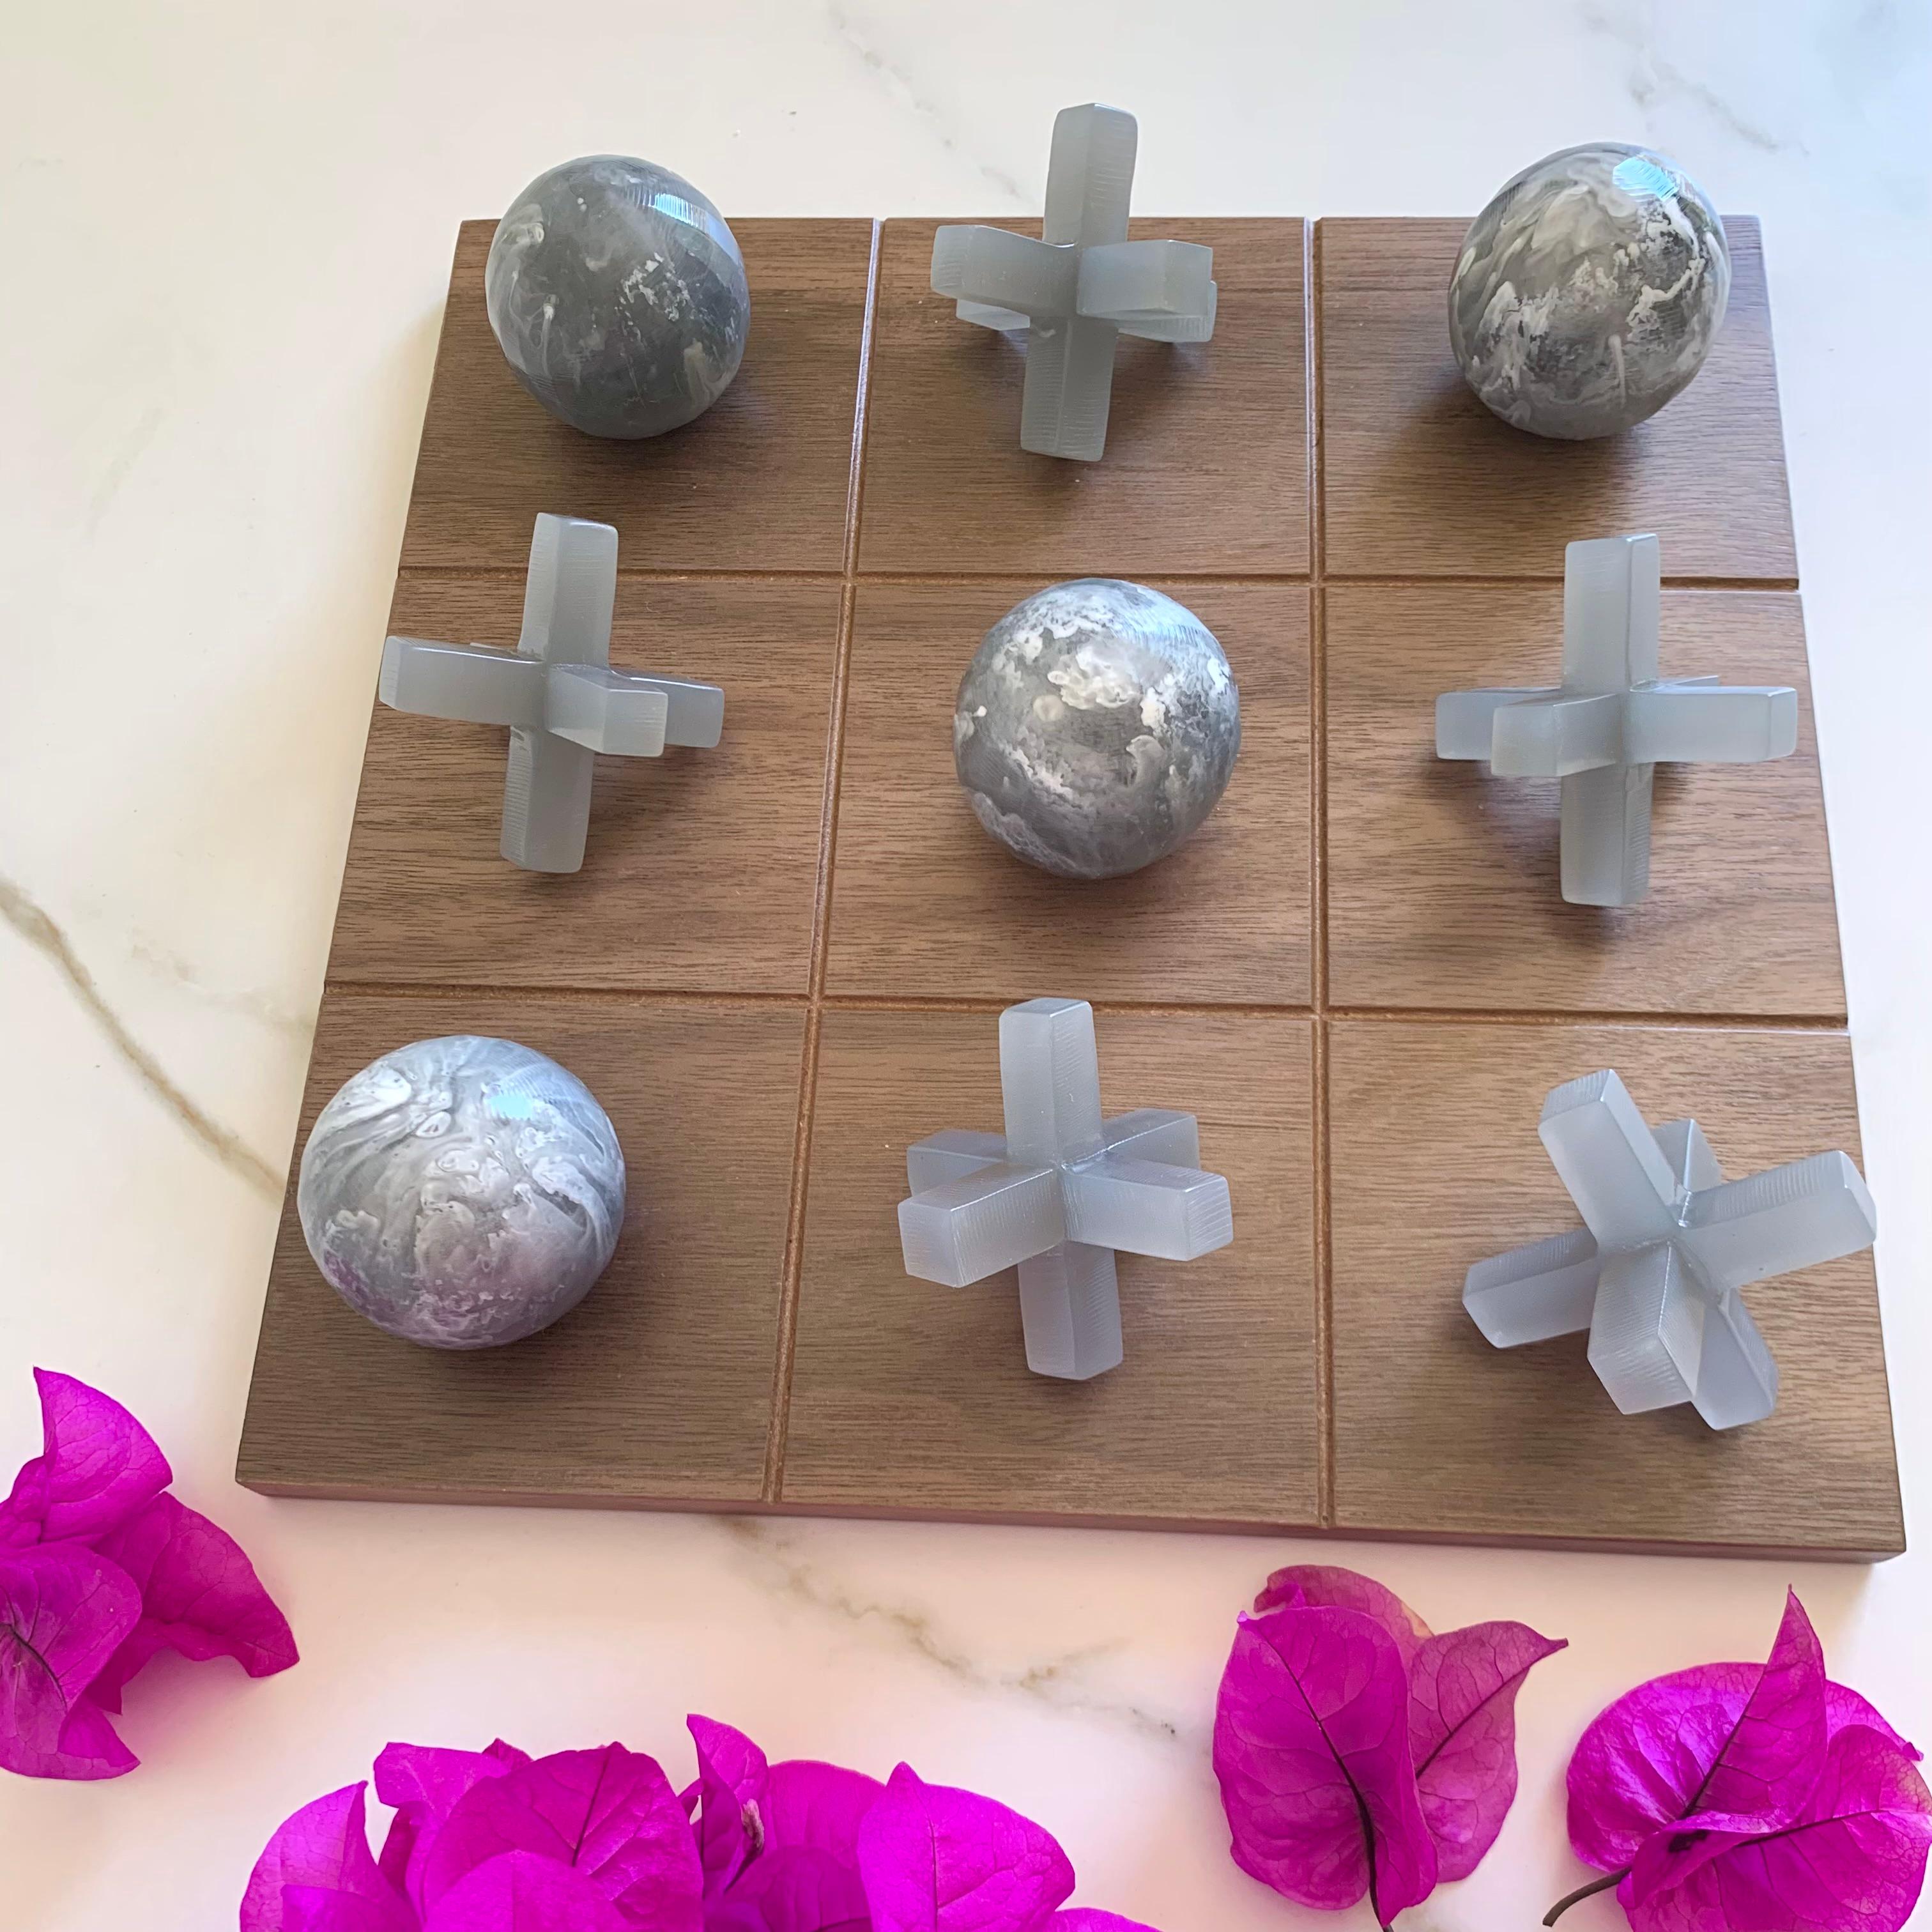 Our Tic Tac Toe is a beautiful, modern and fun take on the classic game. The three dimensional pieces are handmade in grey with white marbled texture & grey , the board is made of oak wood veneer. It will be the coolest statement piece on any coffee